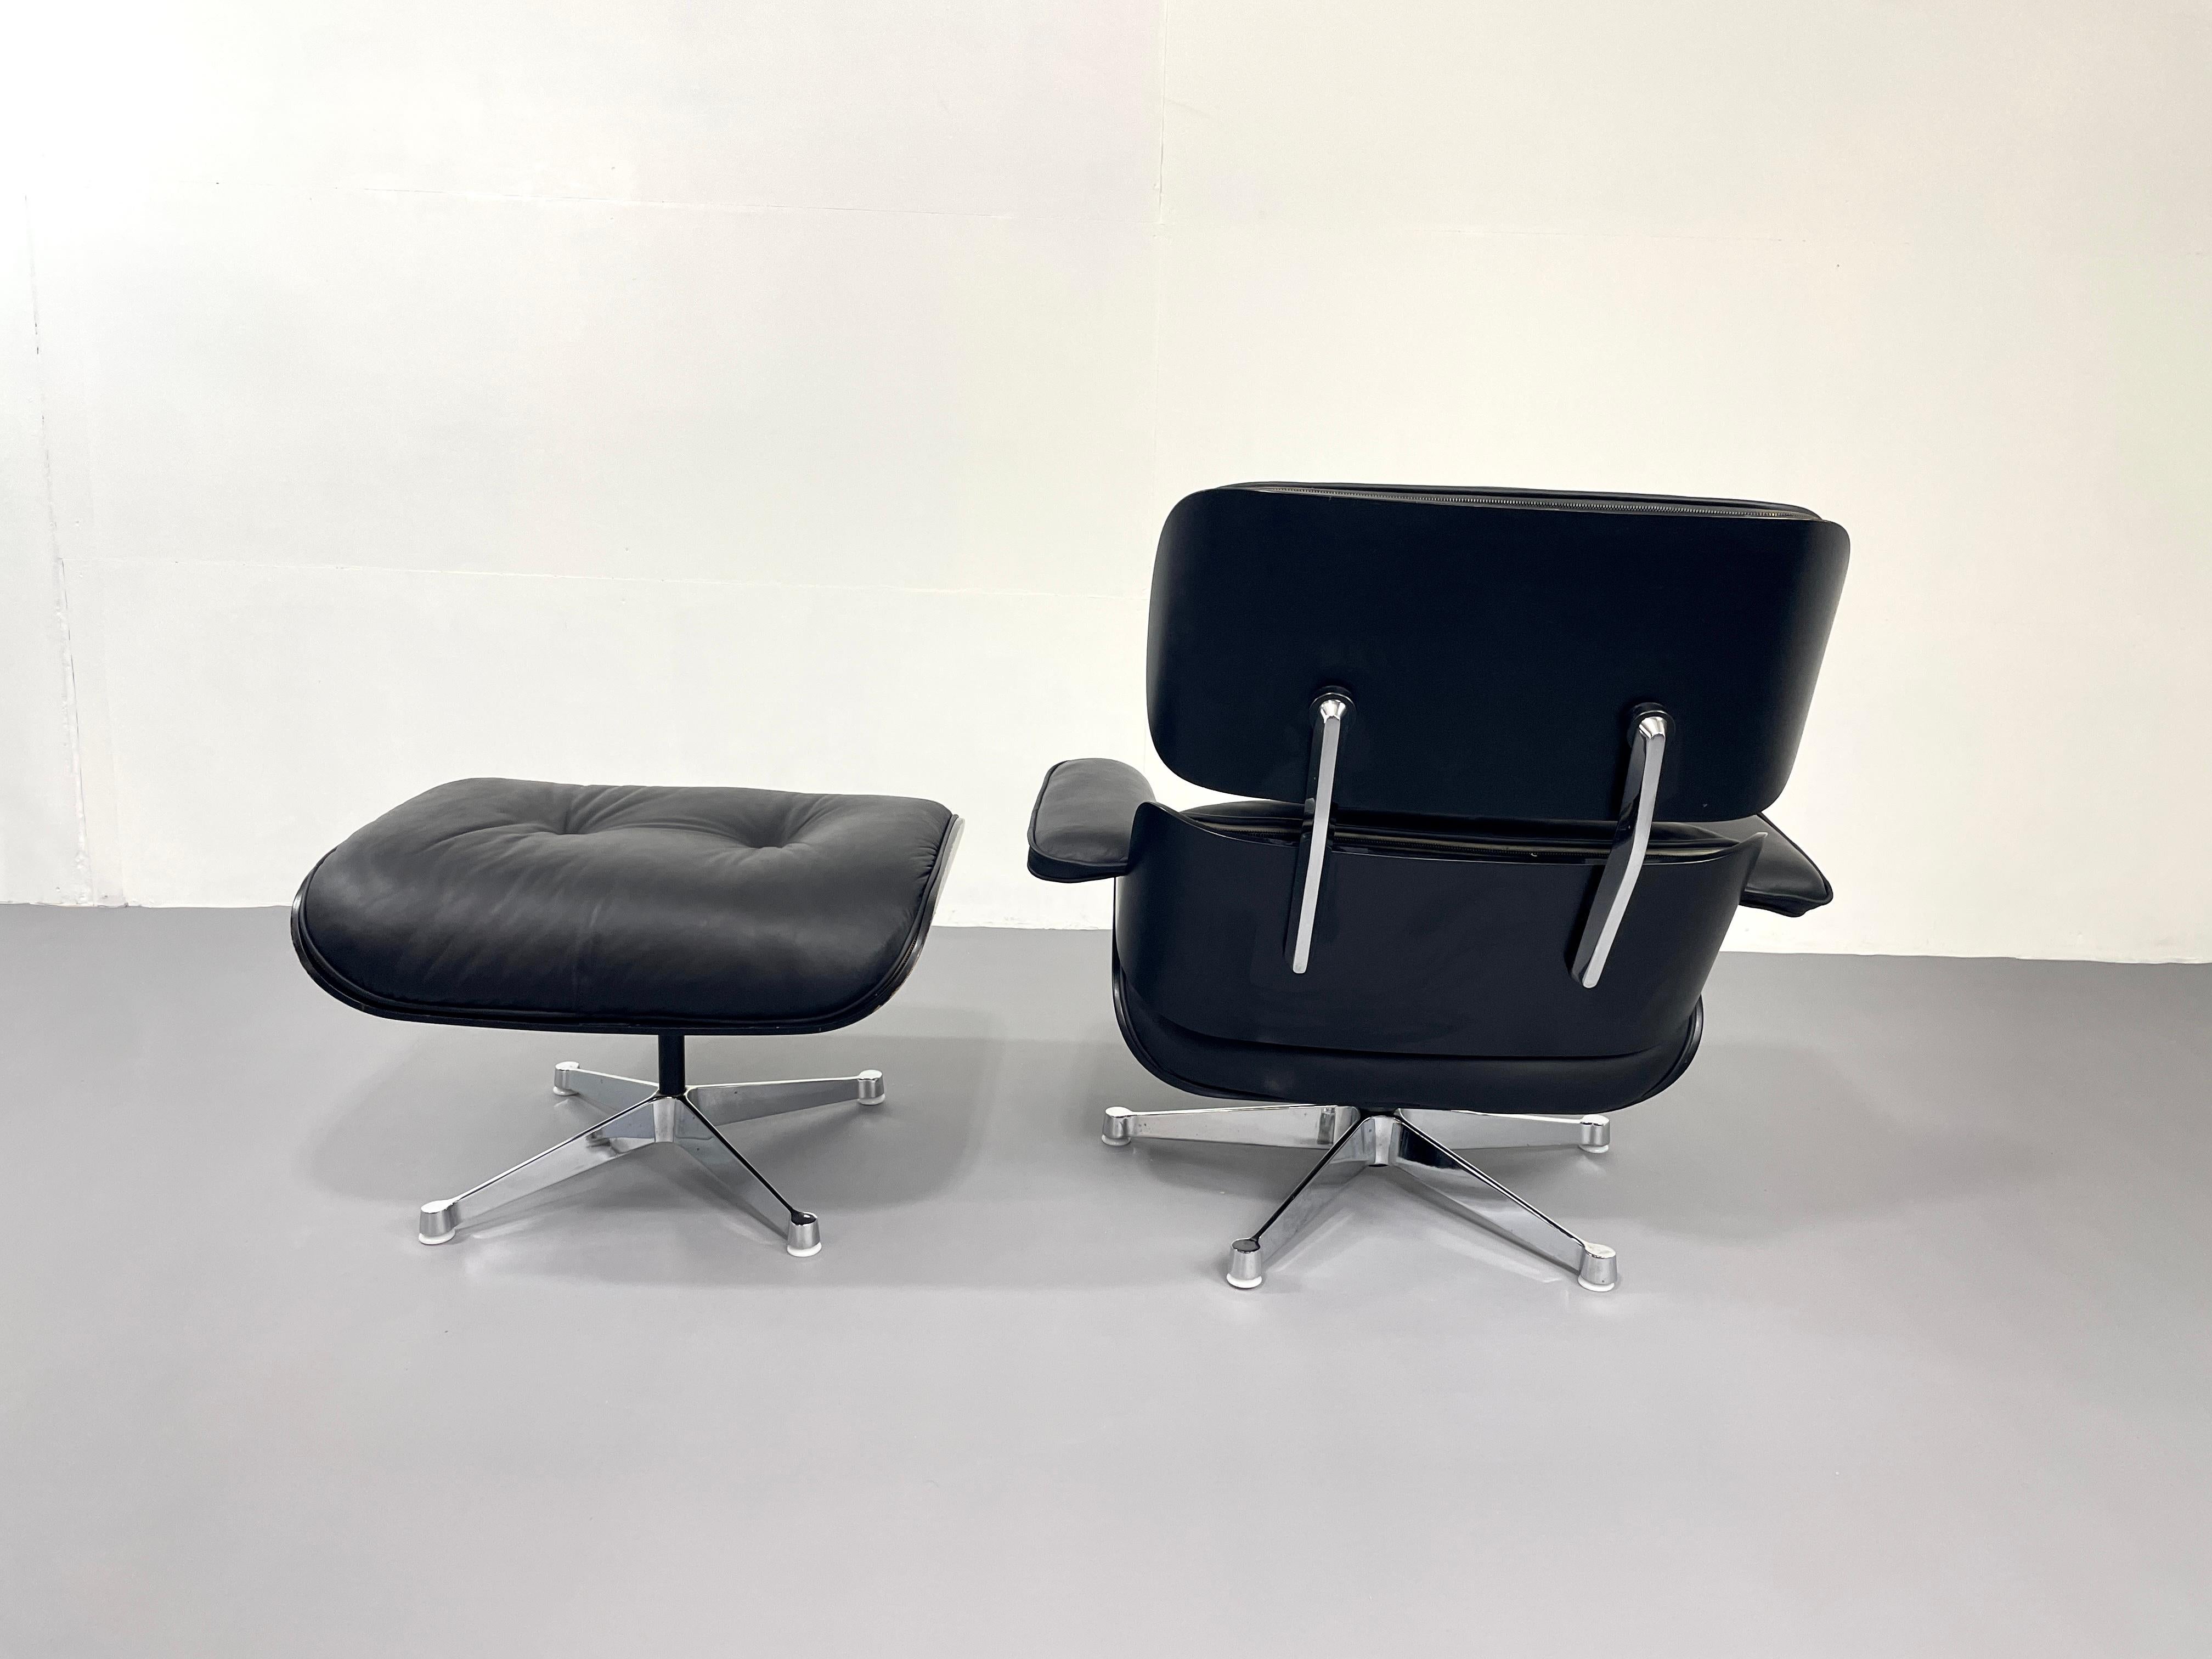 Black vintage Herman Miller Lounge Chair with Ottoman, designed by Eames  For Sale 1